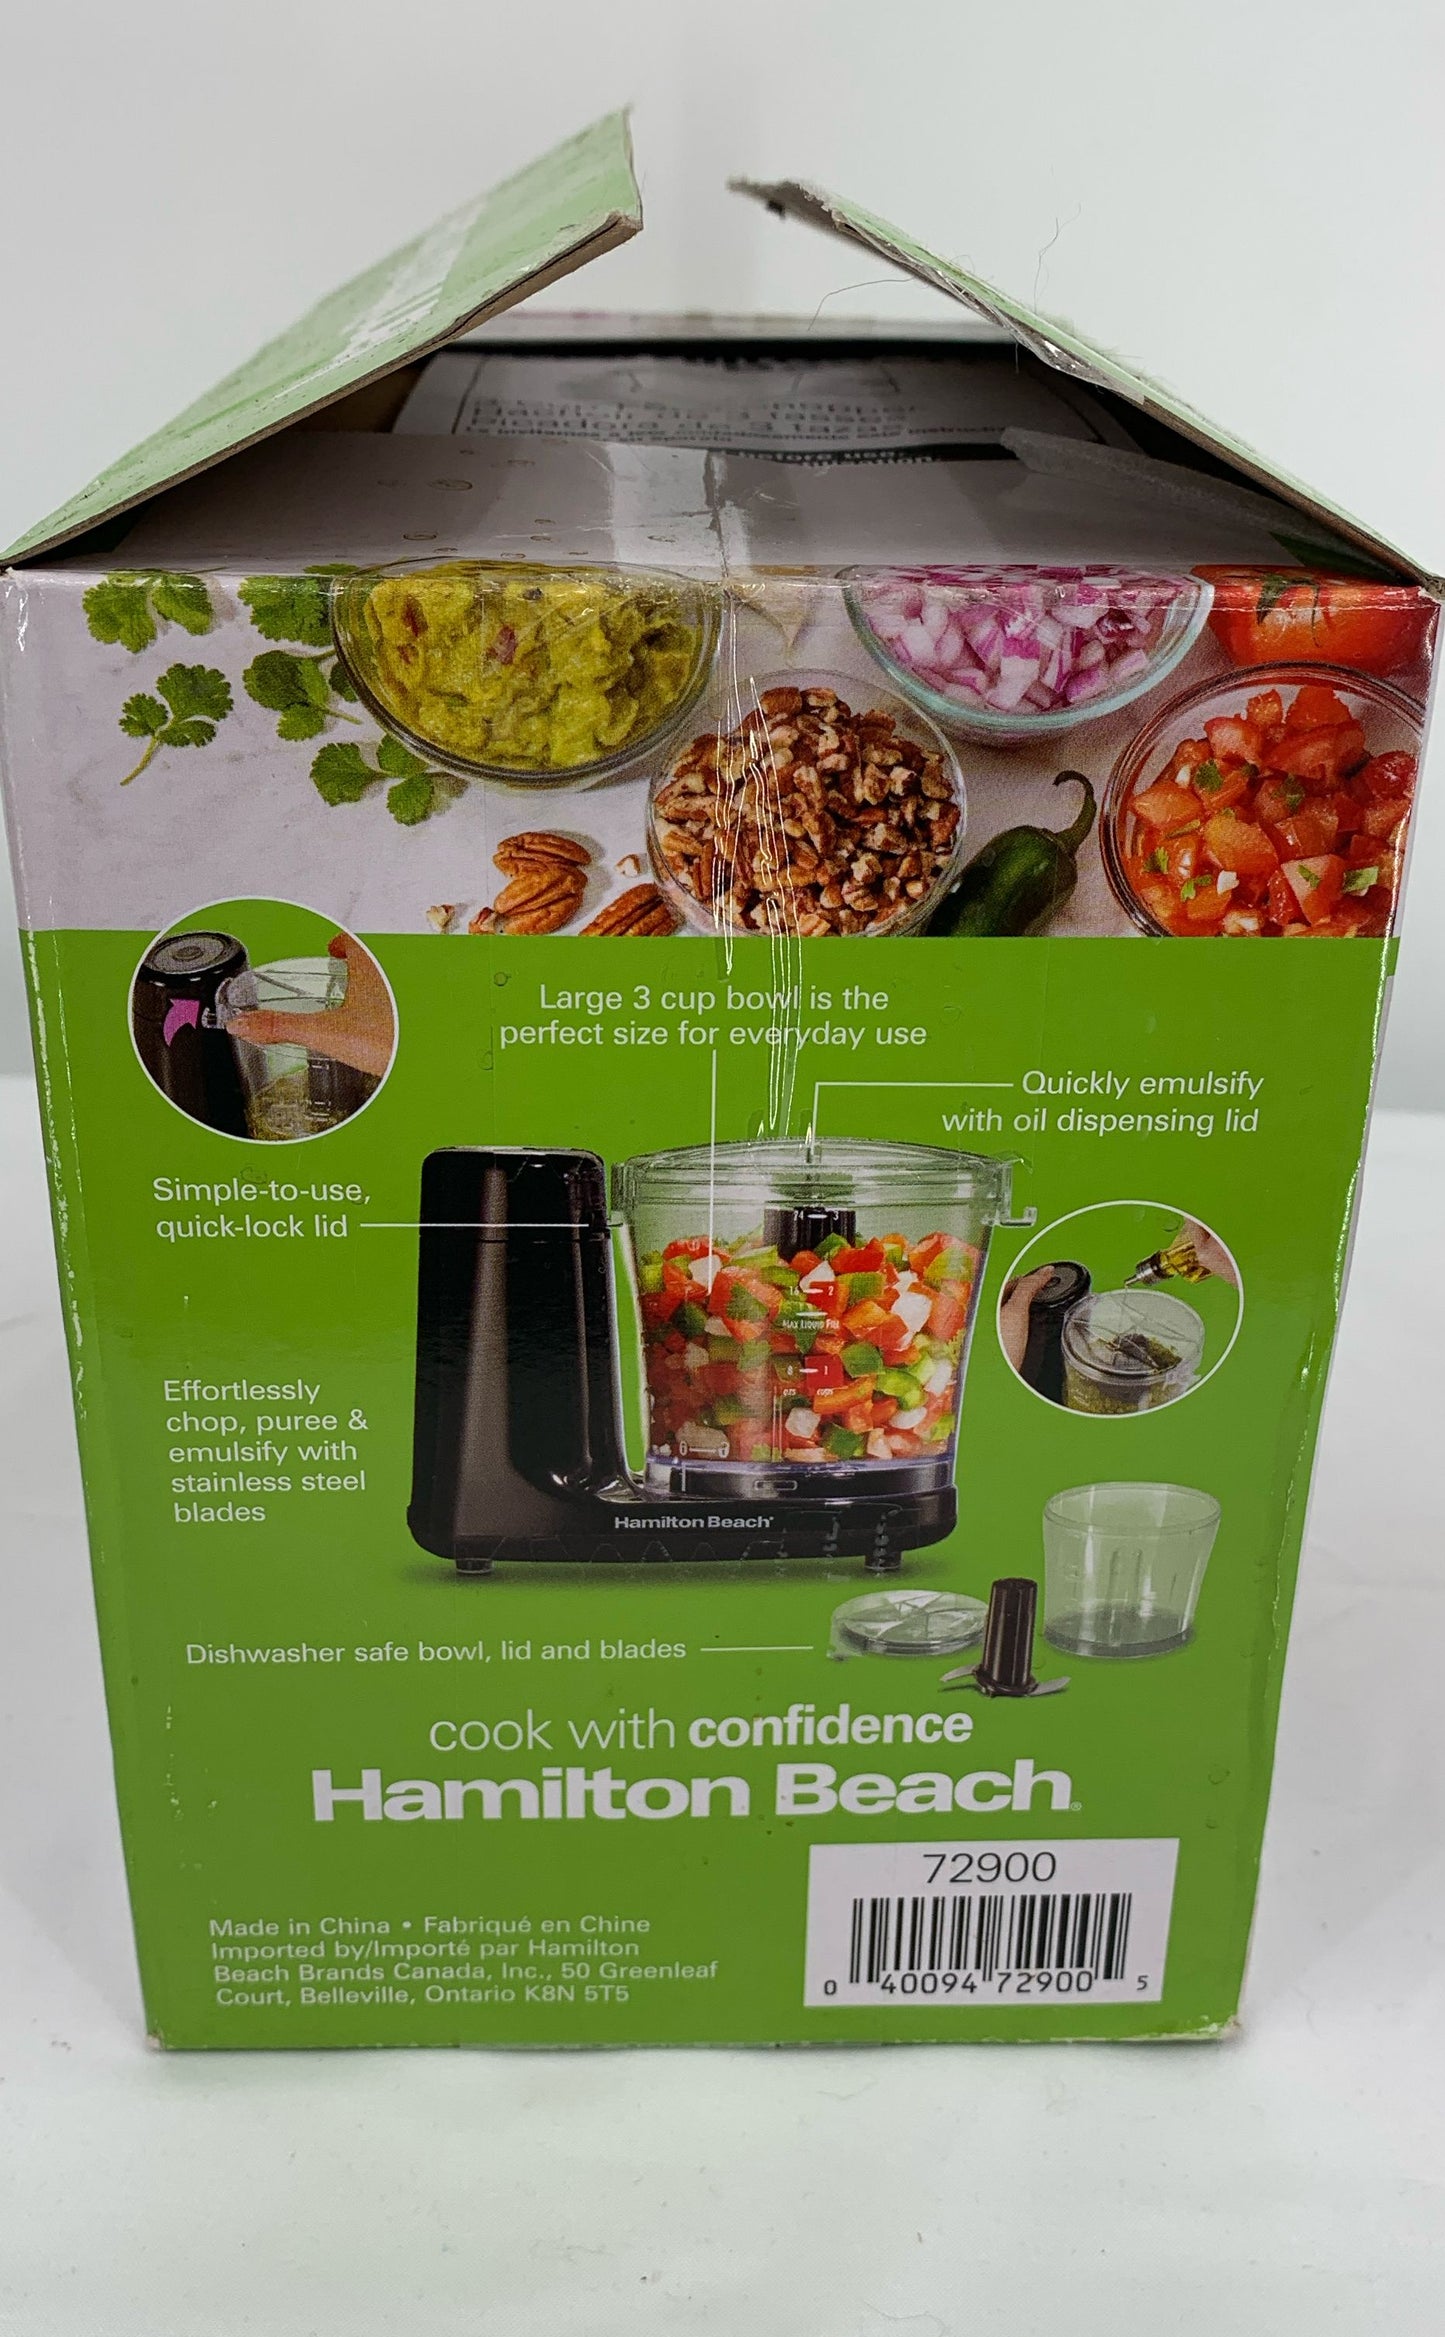 Hamilton Beach 3 Cup Food Chopper 72900 New Open Box With User's Manual